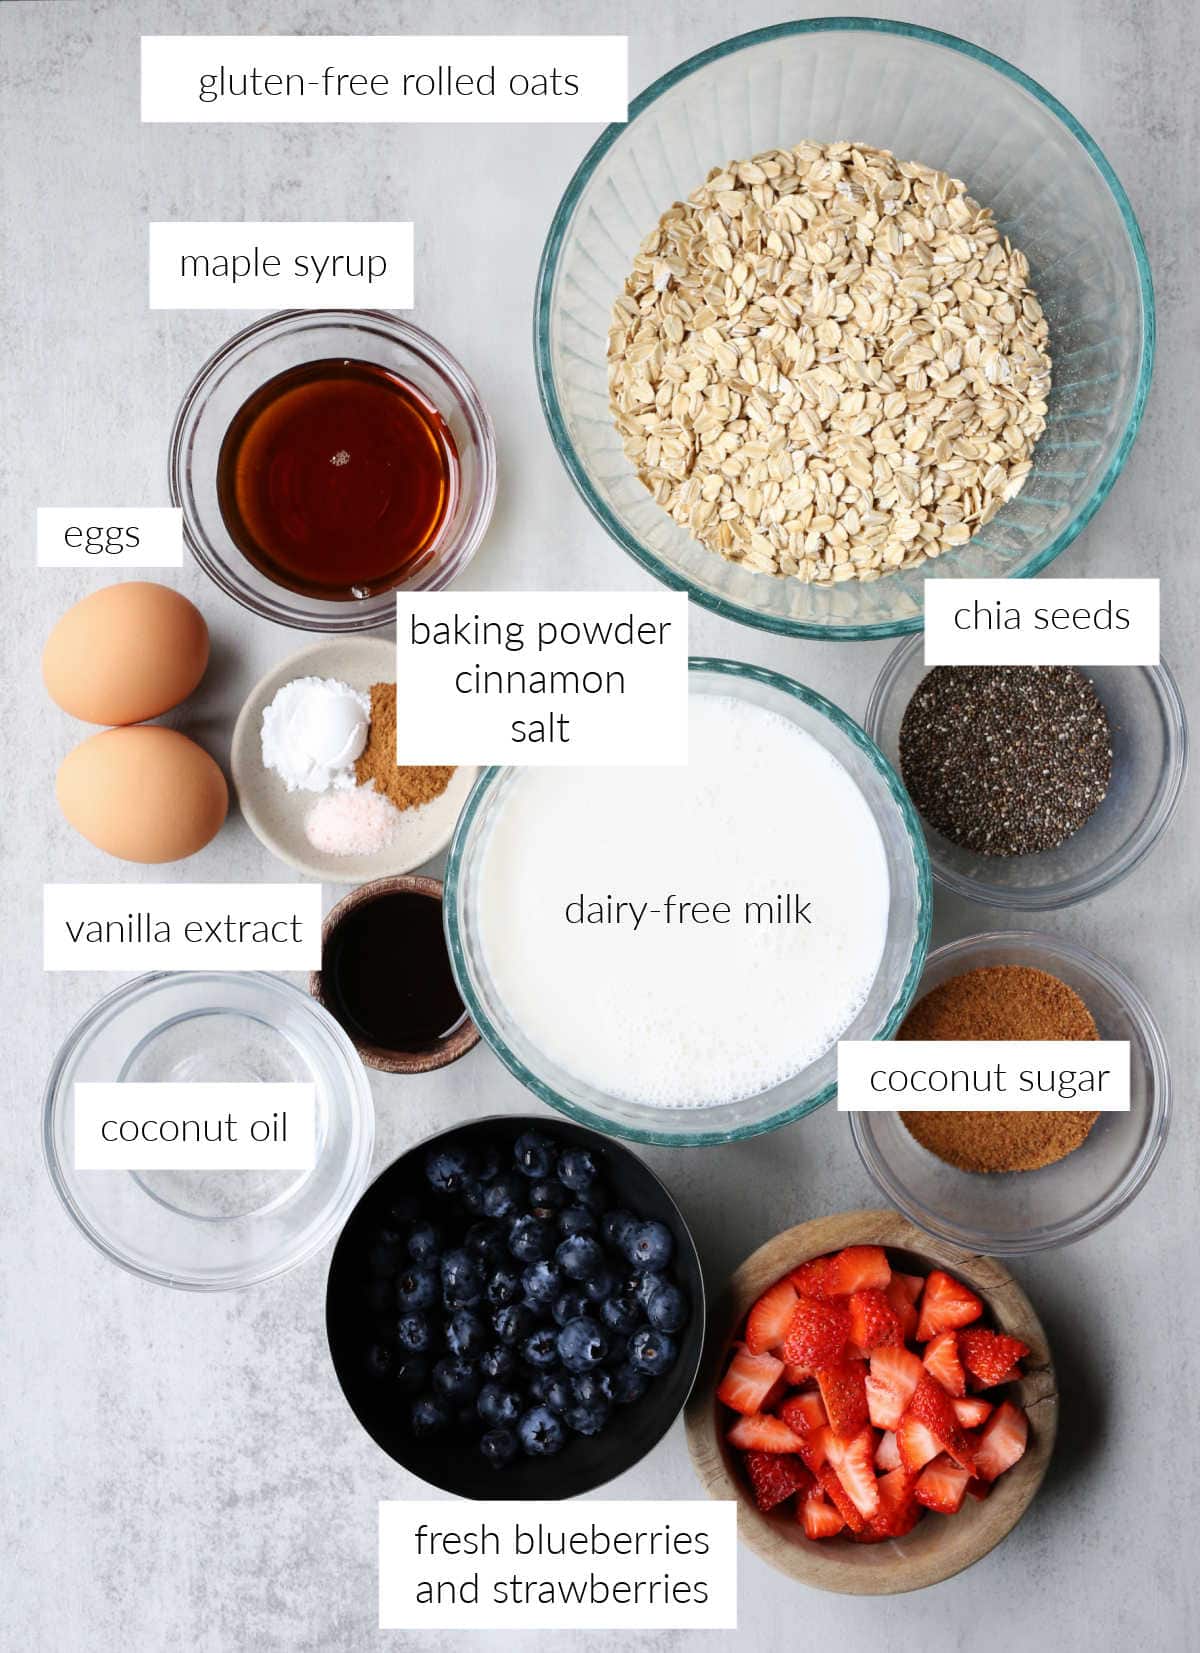 healthy ingredients to make baked oatmeal in the oven